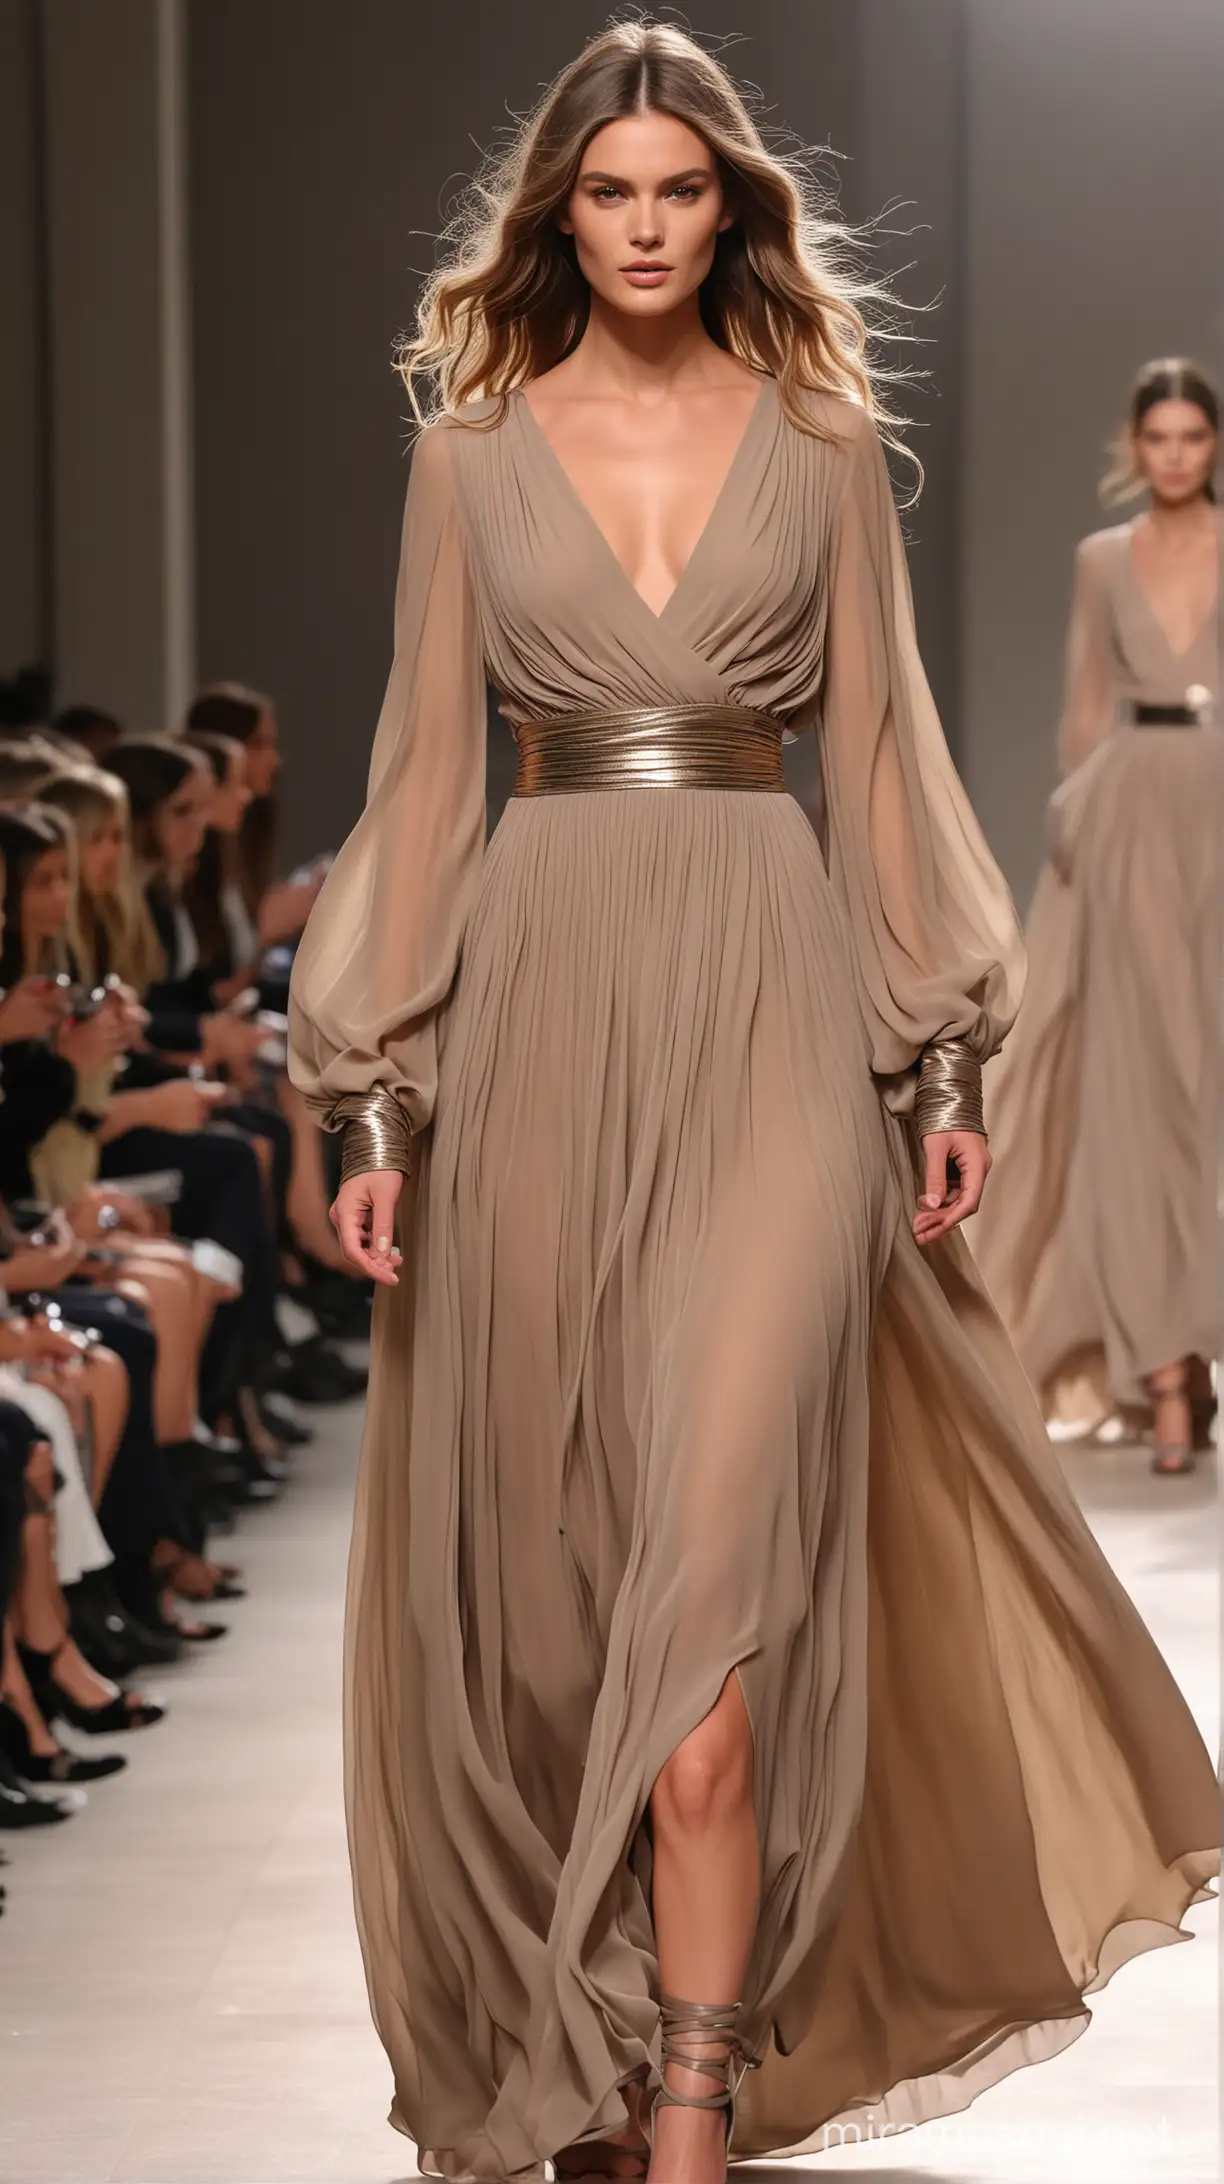 Stunning supermodel runway motion, front angle, wearing a long, large sleeve,  foil coated plain taupe chiffon dress with deep neckline and long layered skirt, hands in the pockets, glamorous, hyper-realistic, Chloé style 